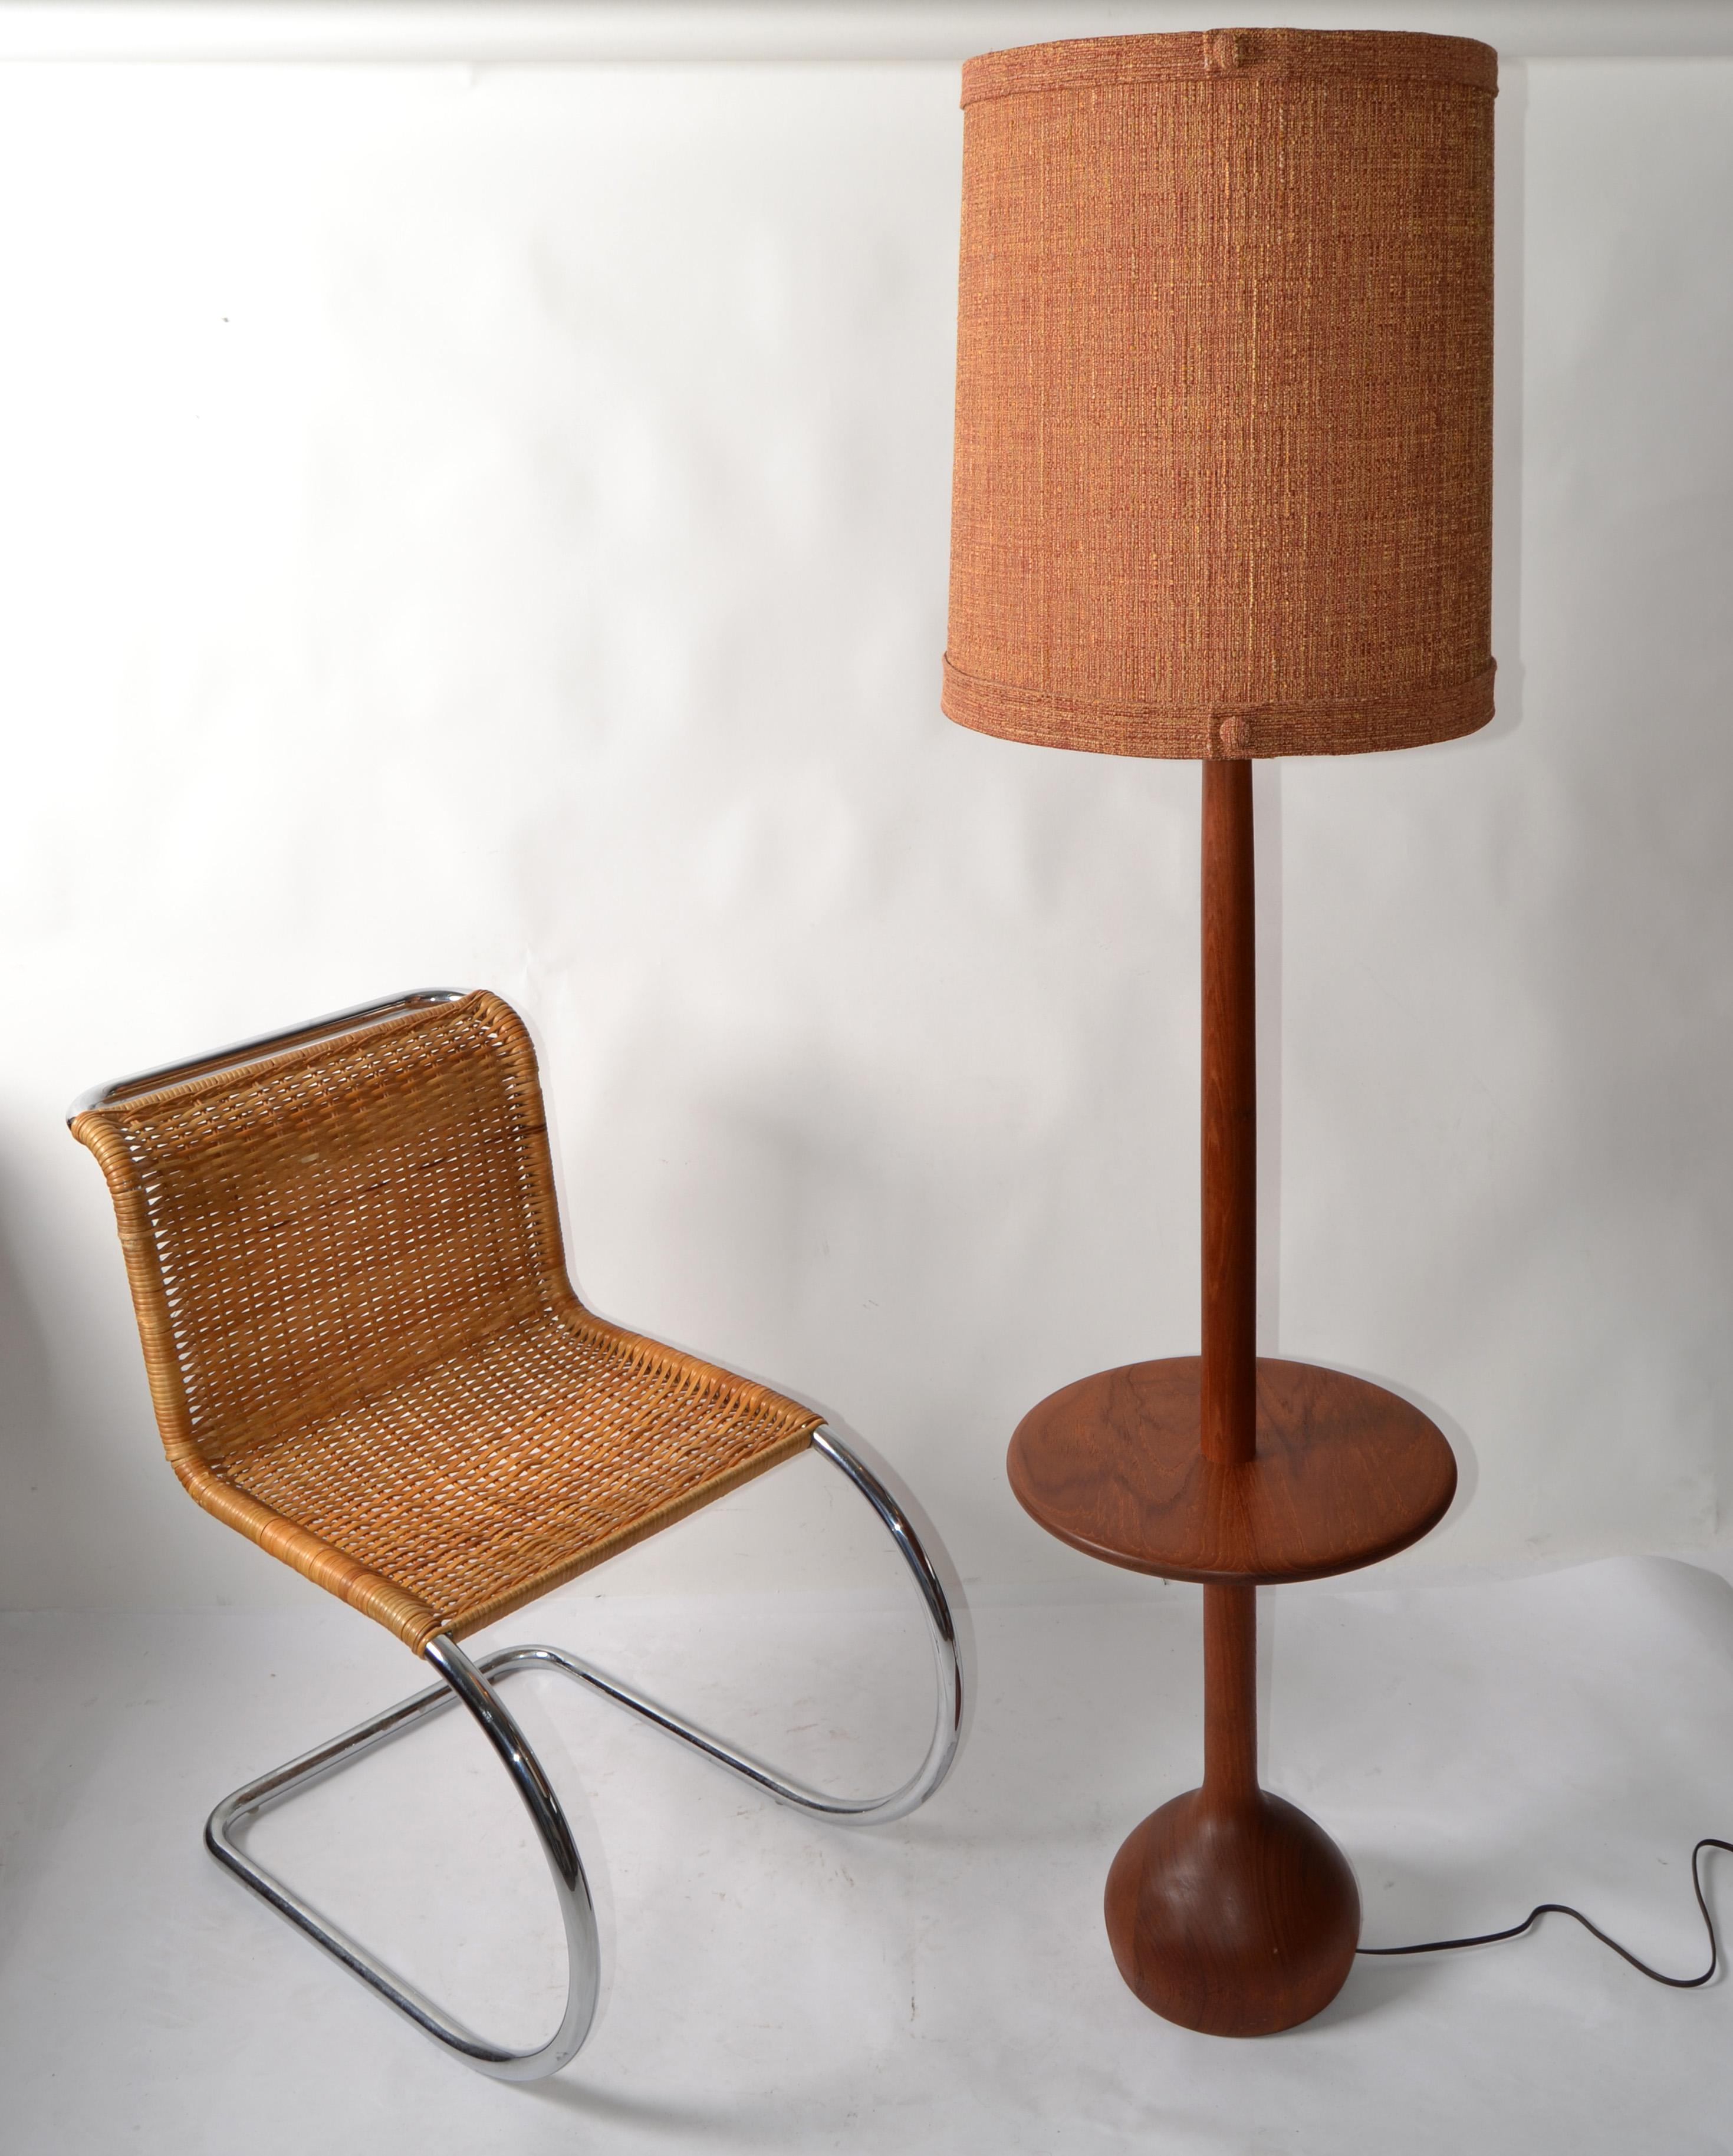 Tubular Ludwig Mies van der Rohe Attributed Mr Chair Armless Woven Cane Seat 70s For Sale 4